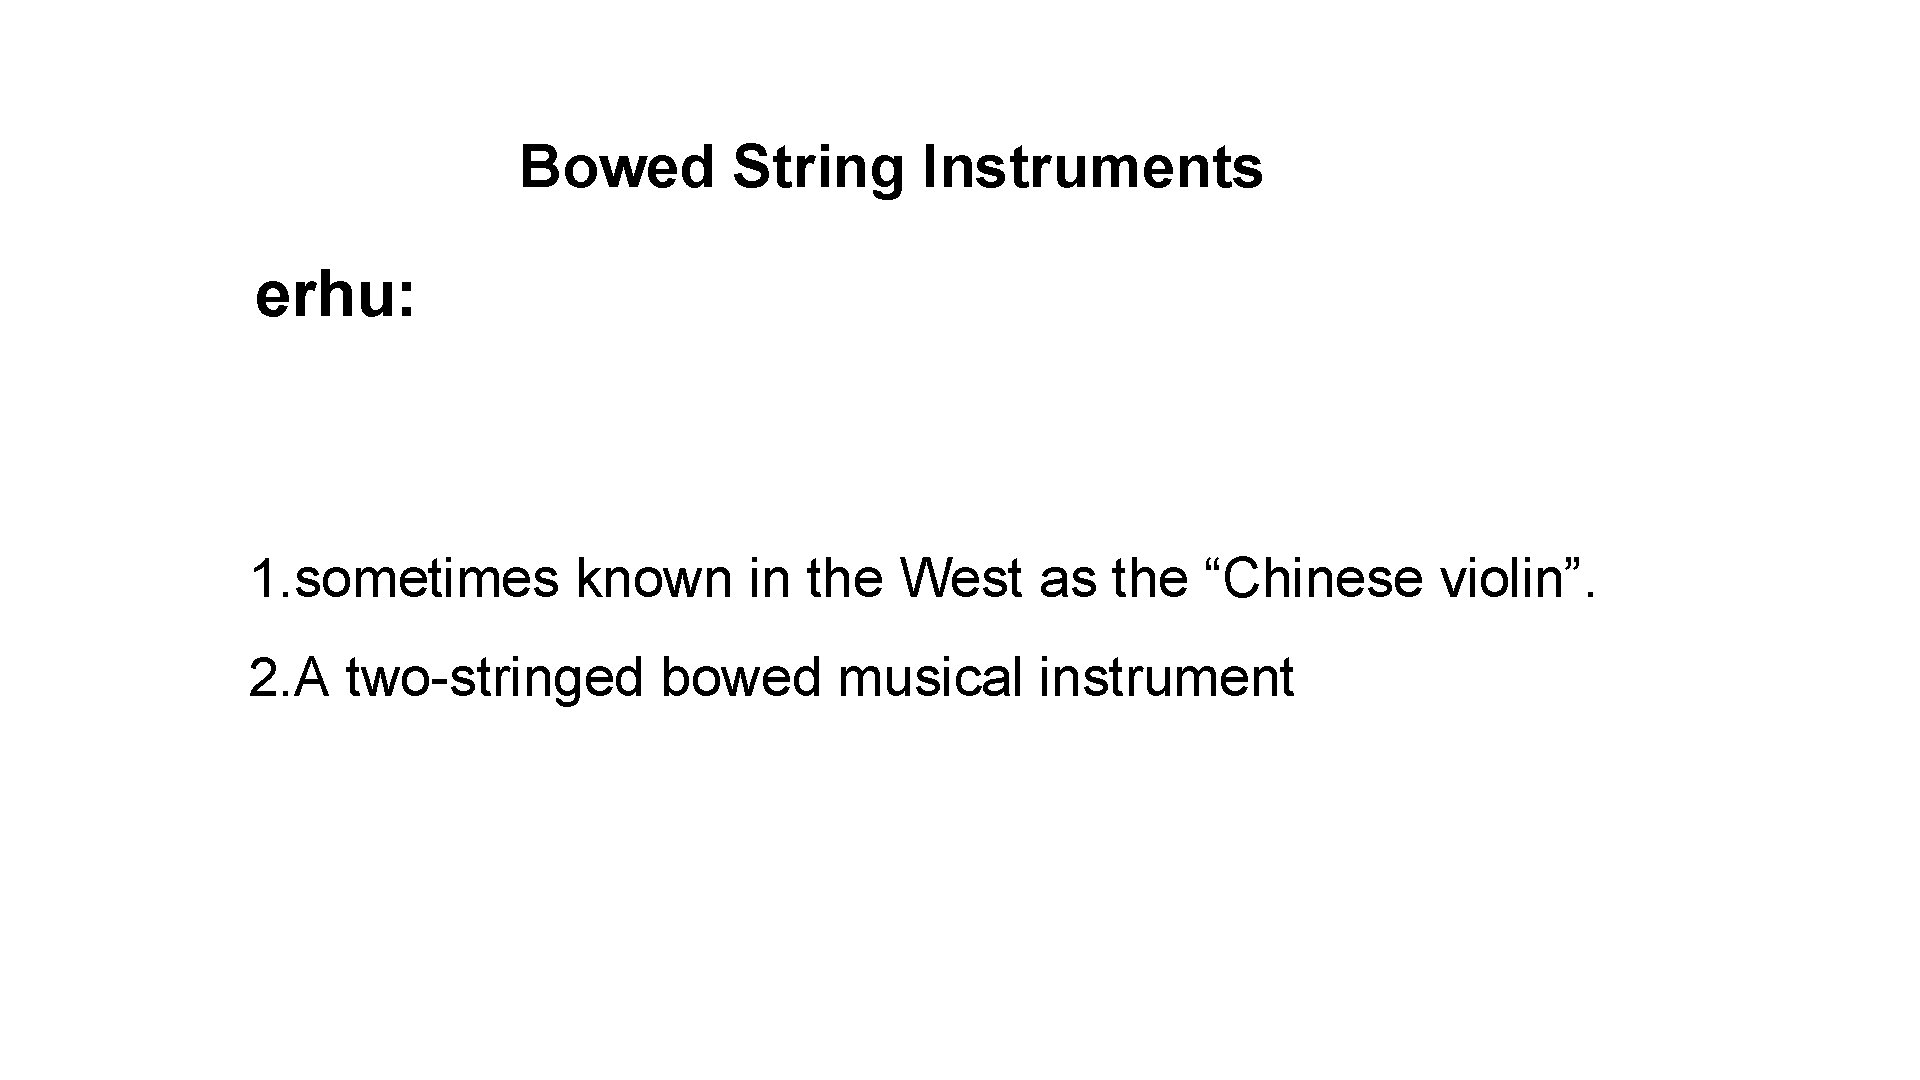 Bowed String Instruments erhu: 1. sometimes known in the West as the “Chinese violin”.